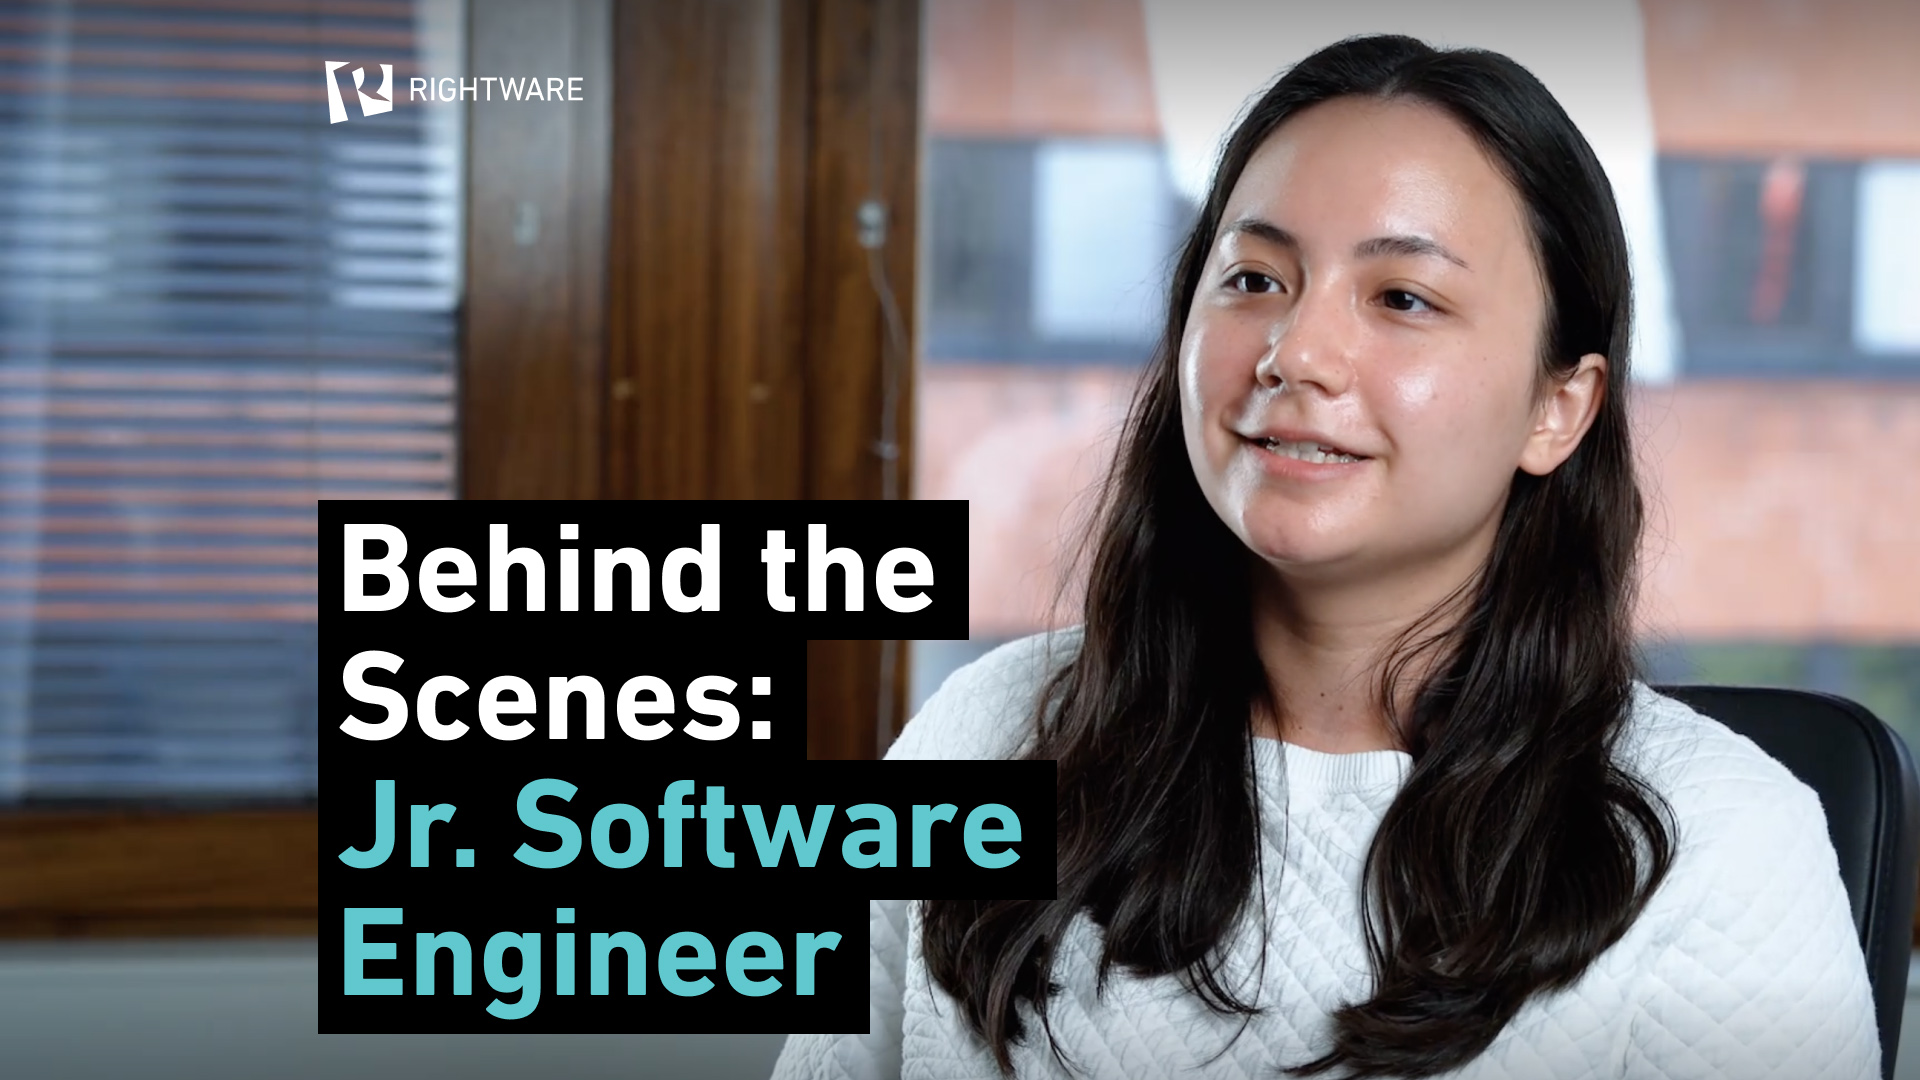 Alanya, unior Software Engineer for Kanzi Services, Rightware